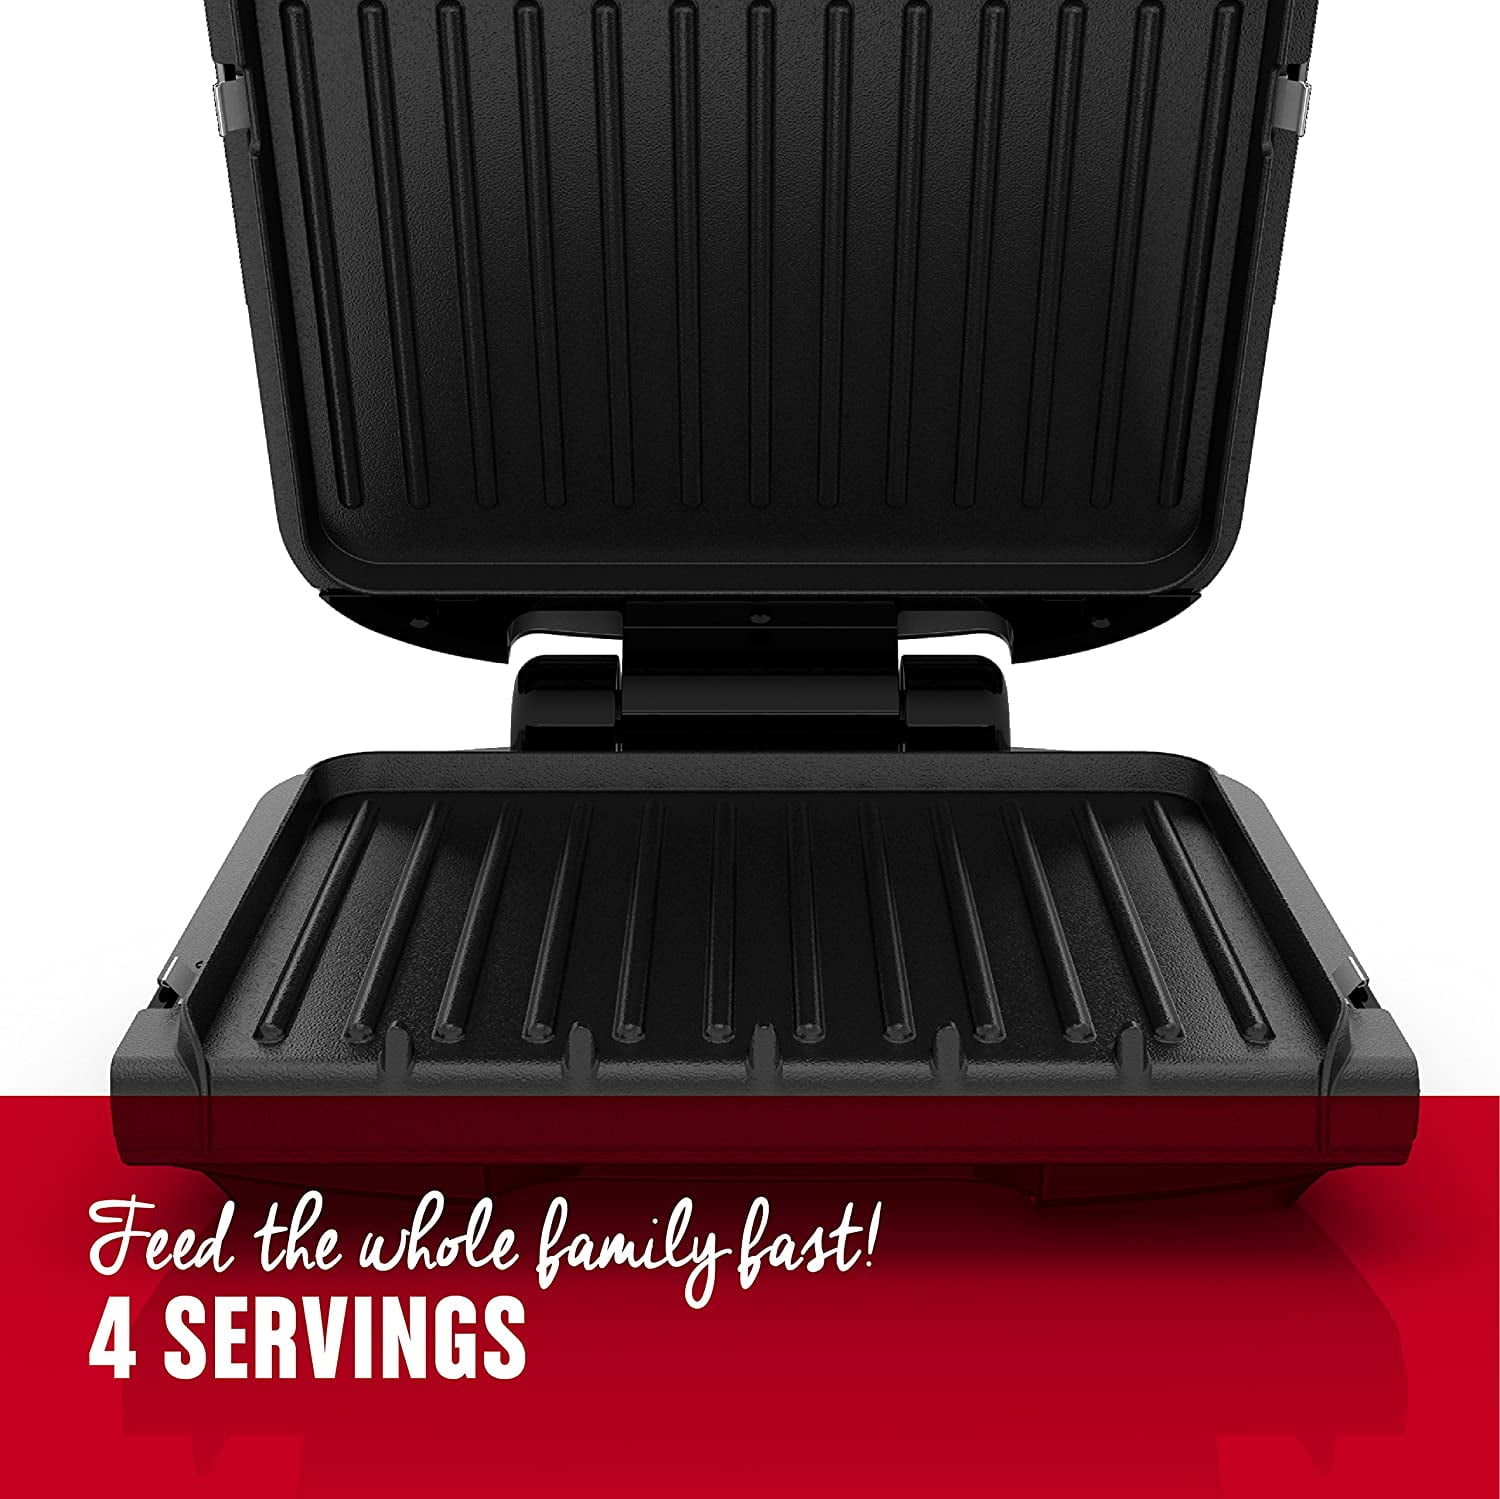 George Foreman 4-Serving Removable Plate Grill and Panini Press Black GRP1060B 